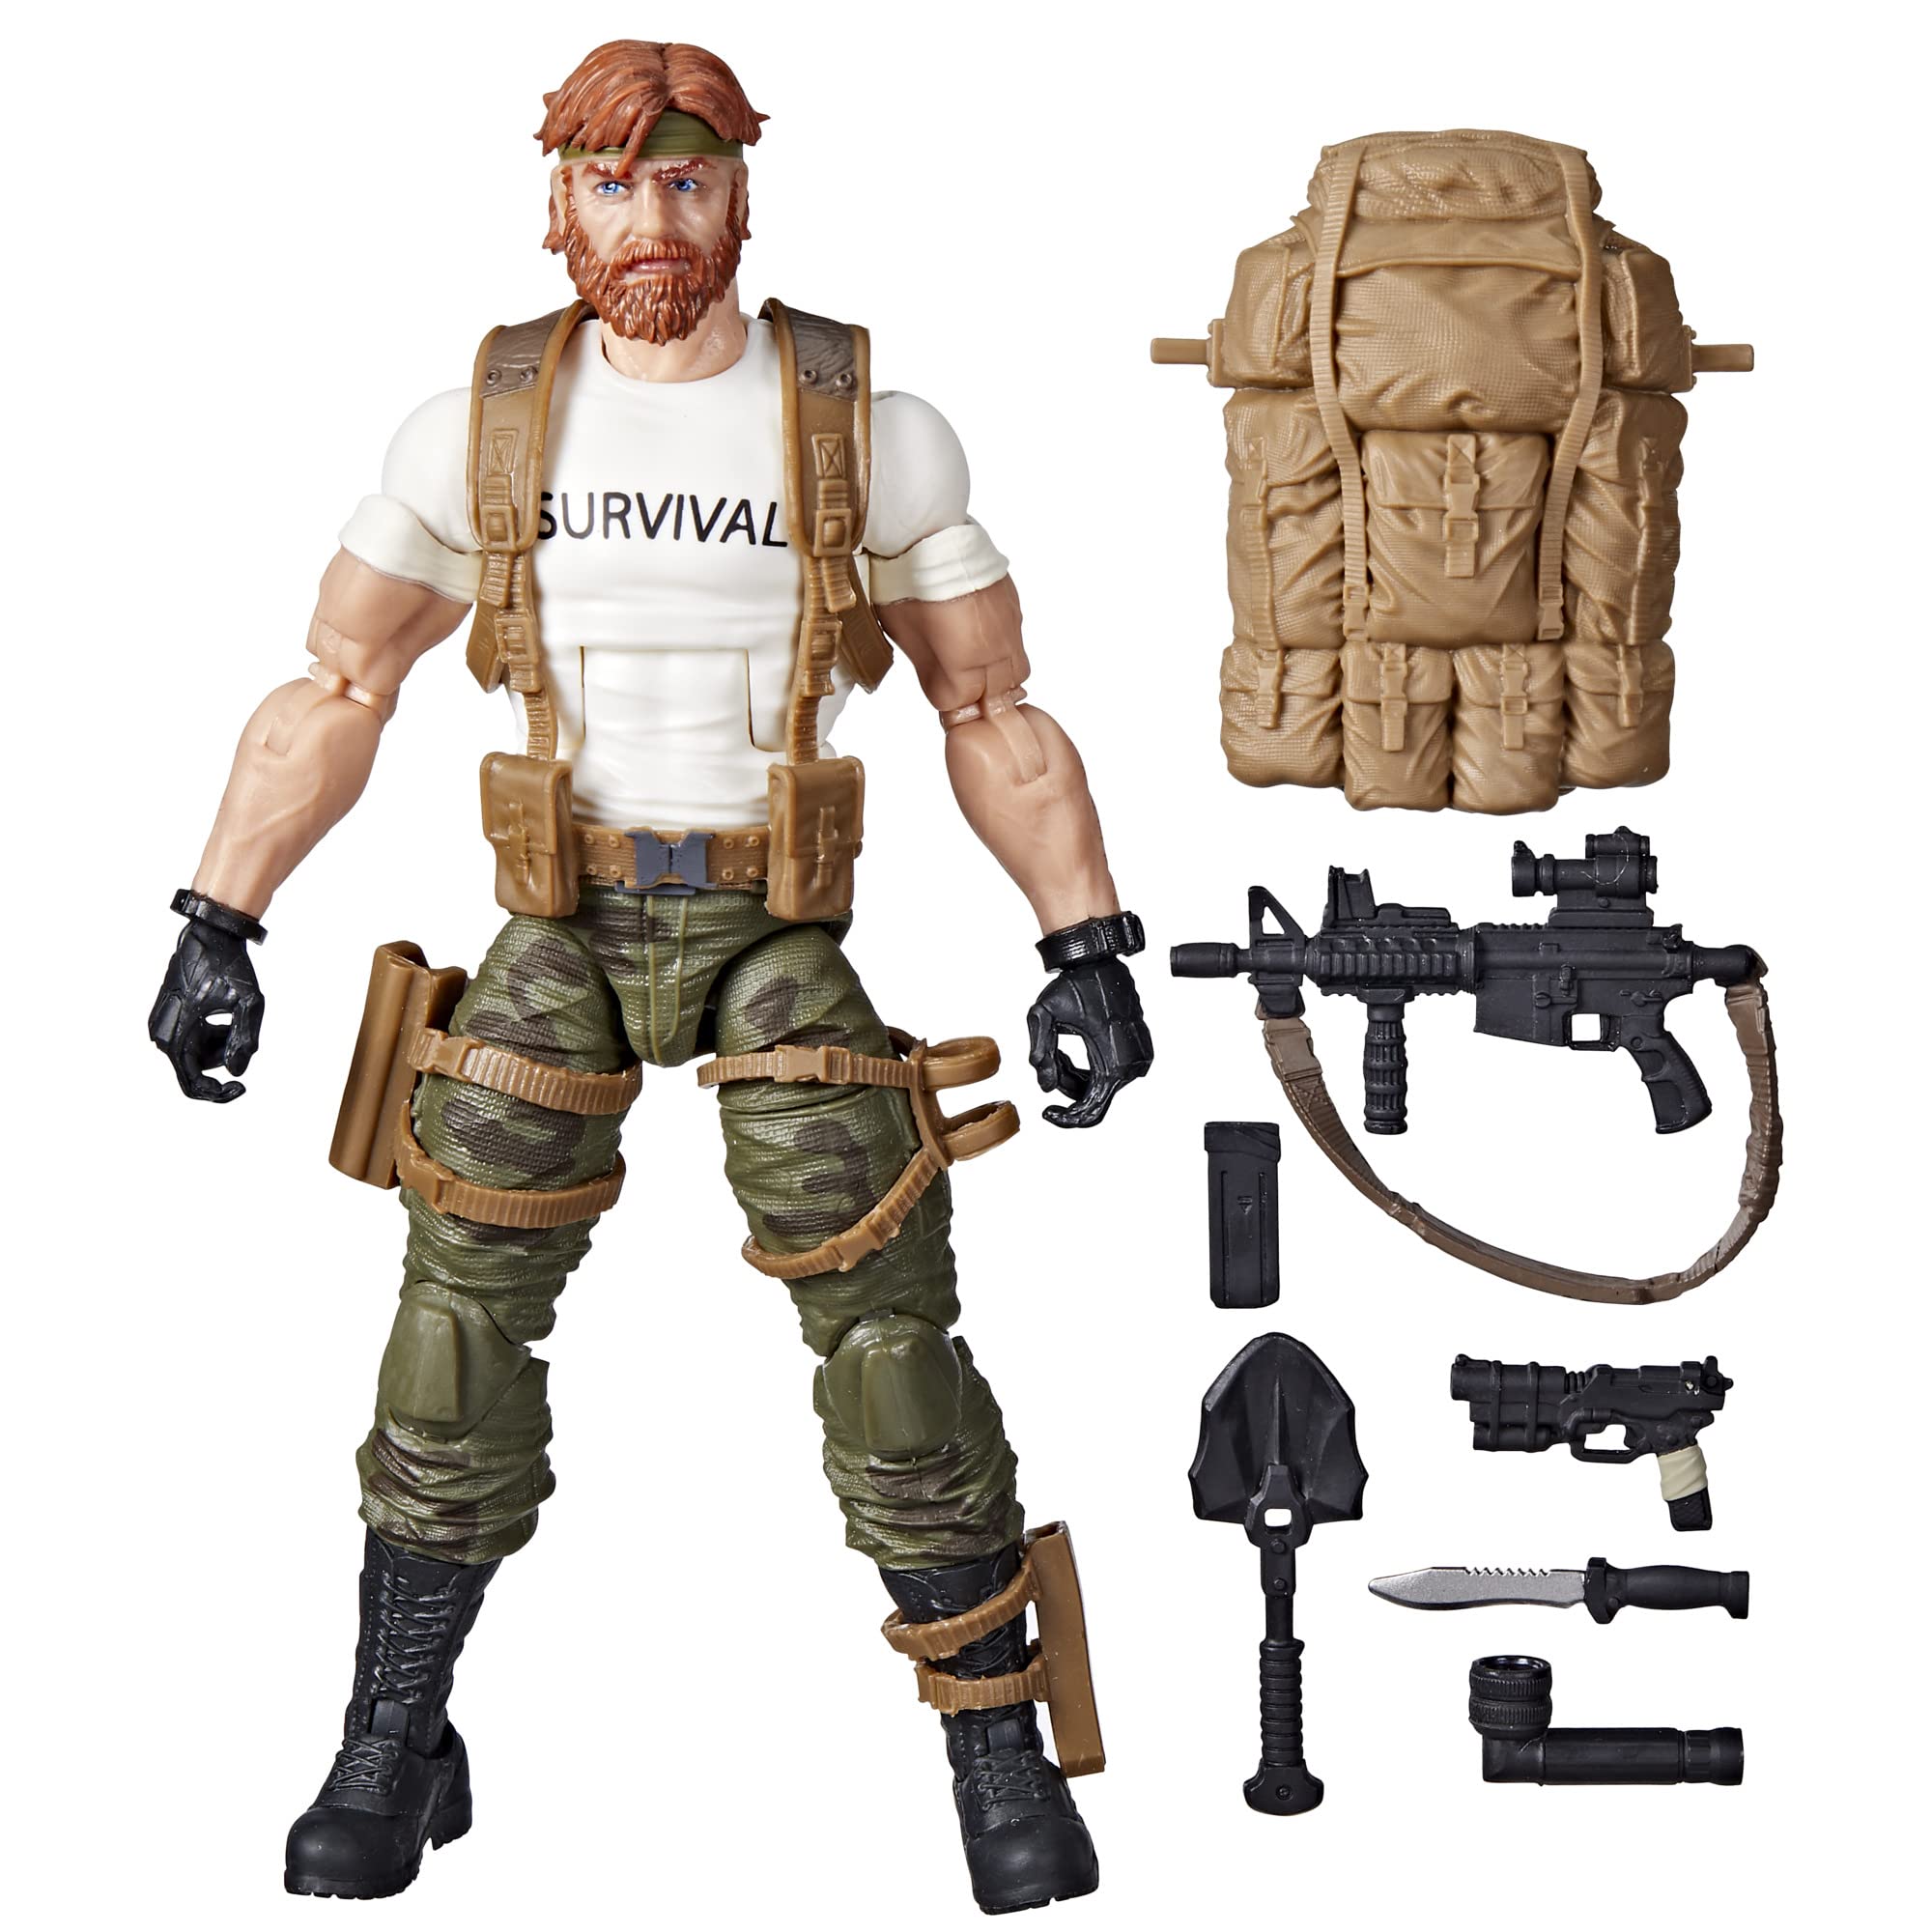 G.I. Joe Classified Series Stuart Outback Selkirk Action Figure 63 Collectible Premium Toy with Accessories 6-Inch-Scale Custom Package Art, Multicolor